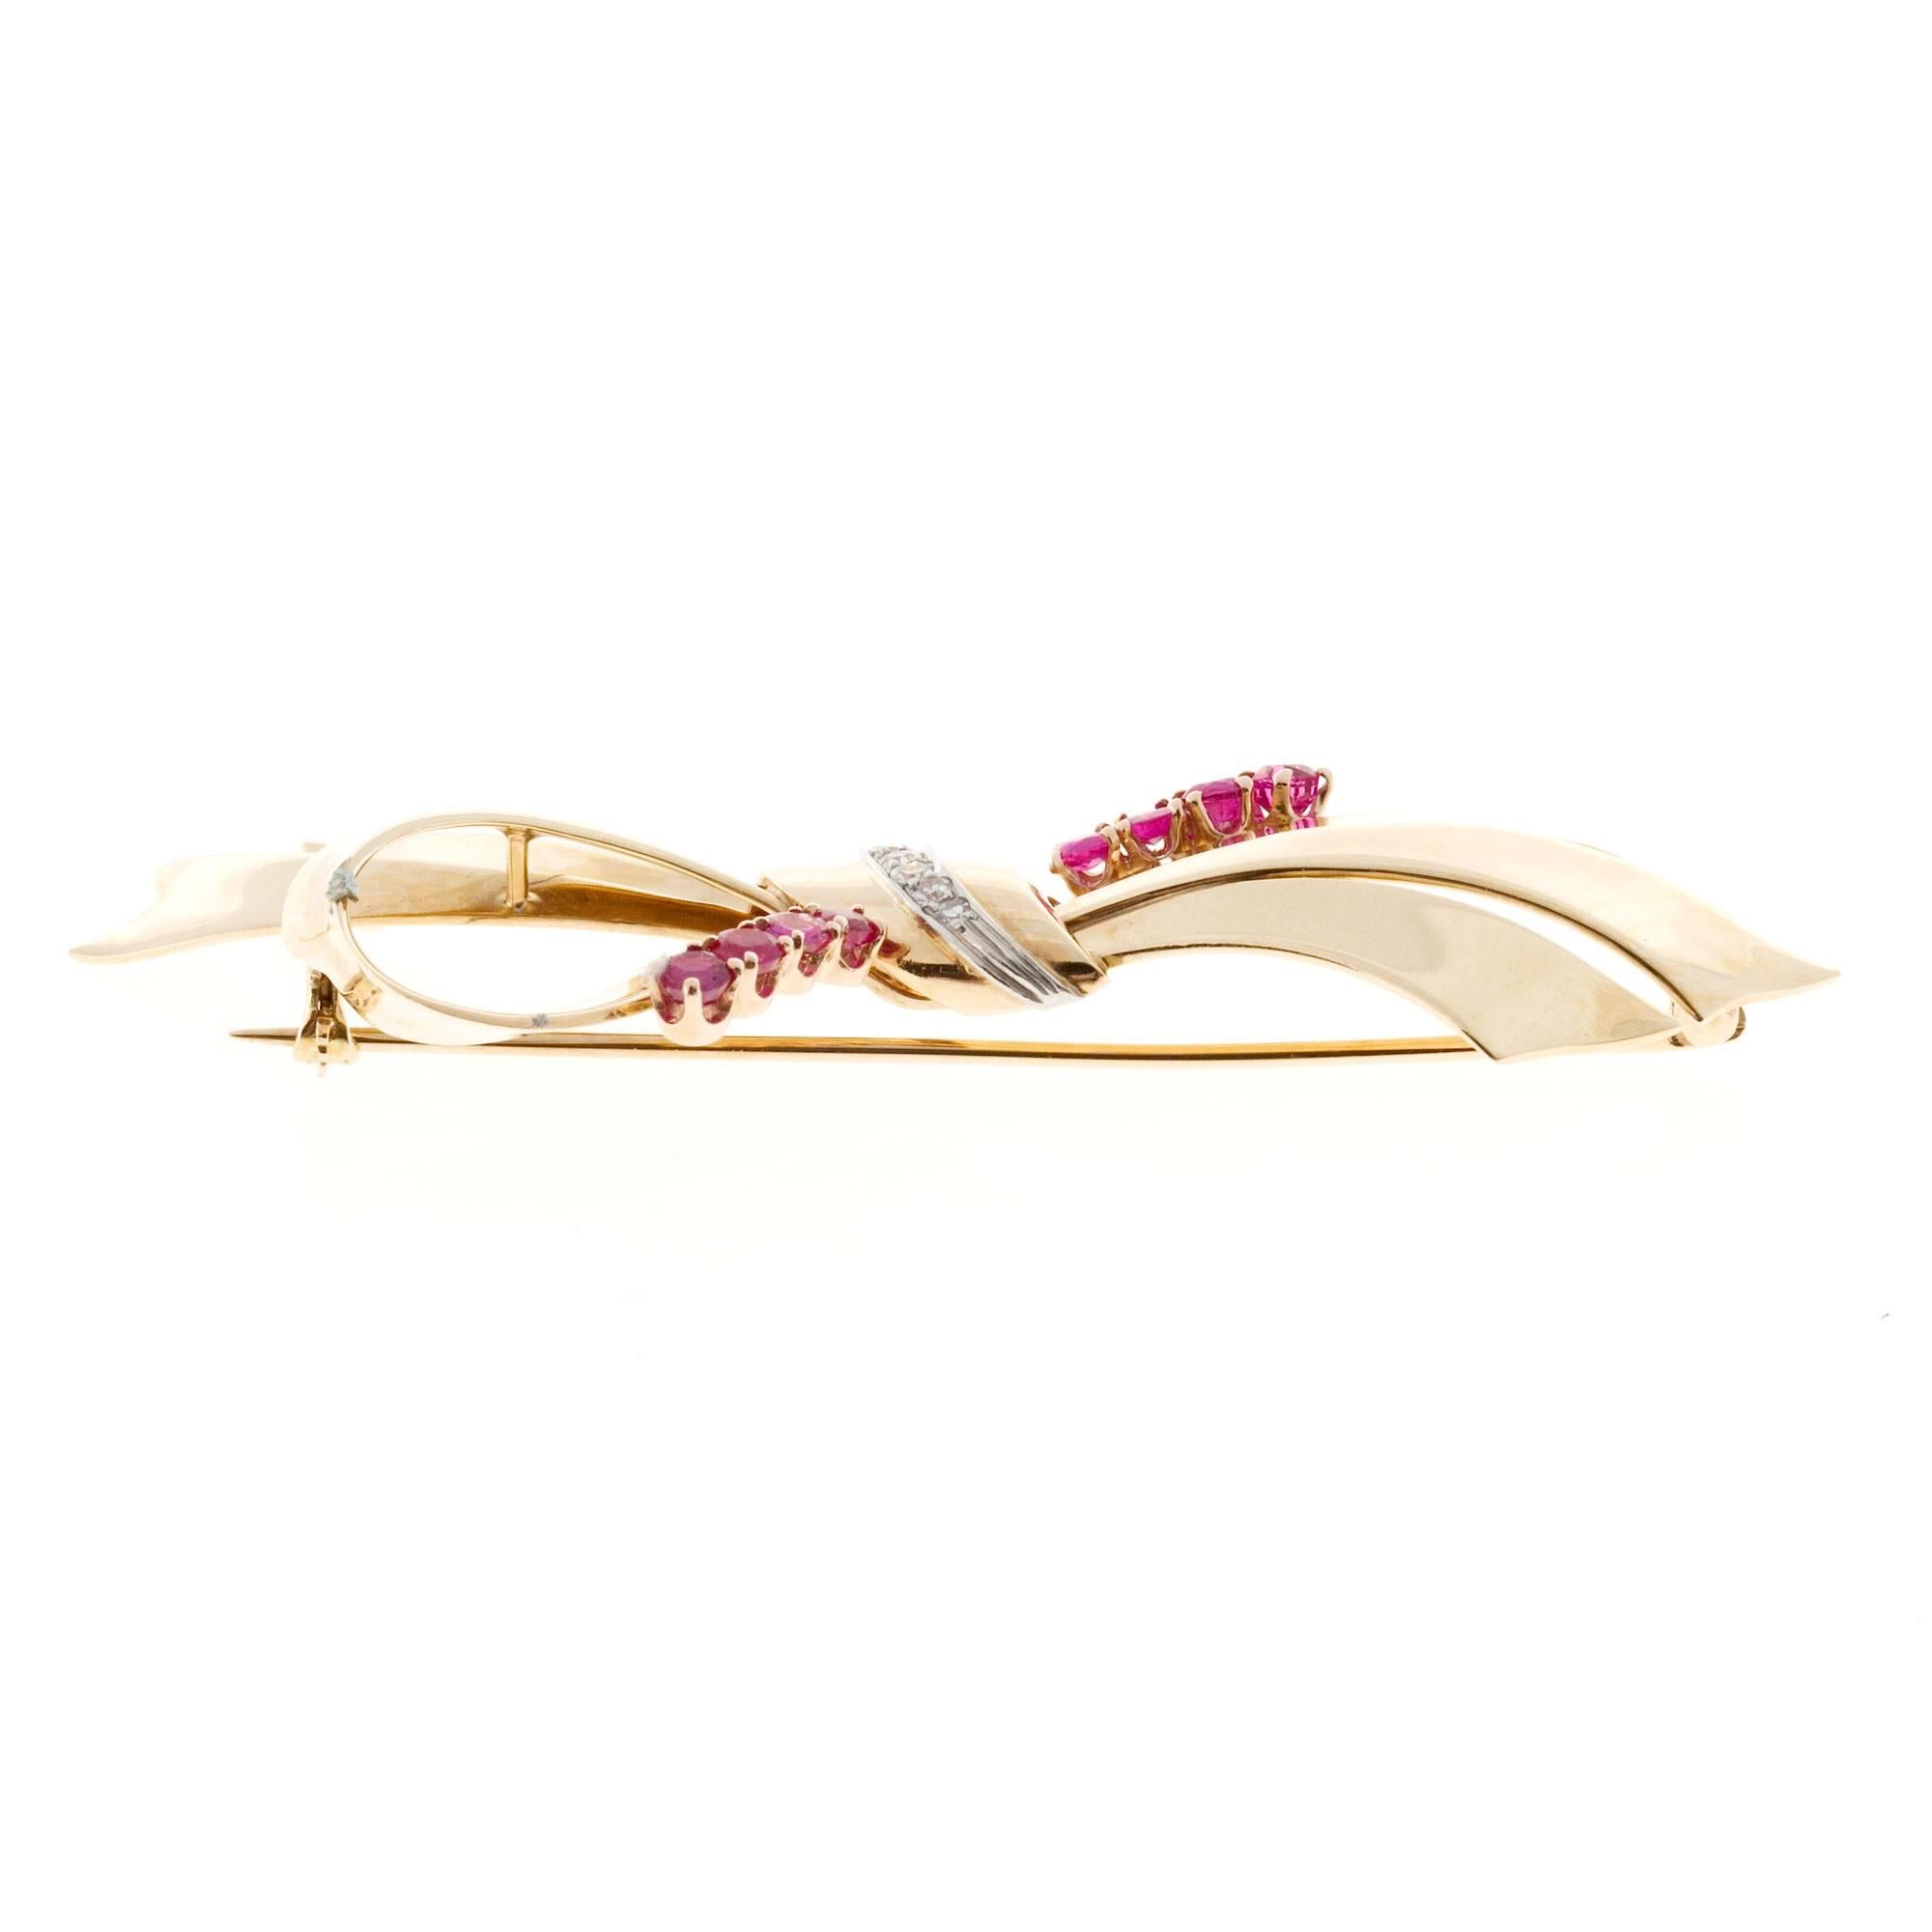 Authentic original Tiffany & Co 14k pink gold and platinum bow style pin with natural genuine pinkish red Rubies and genuine diamonds. 

6 round diamonds, approx. total weight .07cts, F, VS
8 genuine natural pink Rubies 3mm, approx. total weight